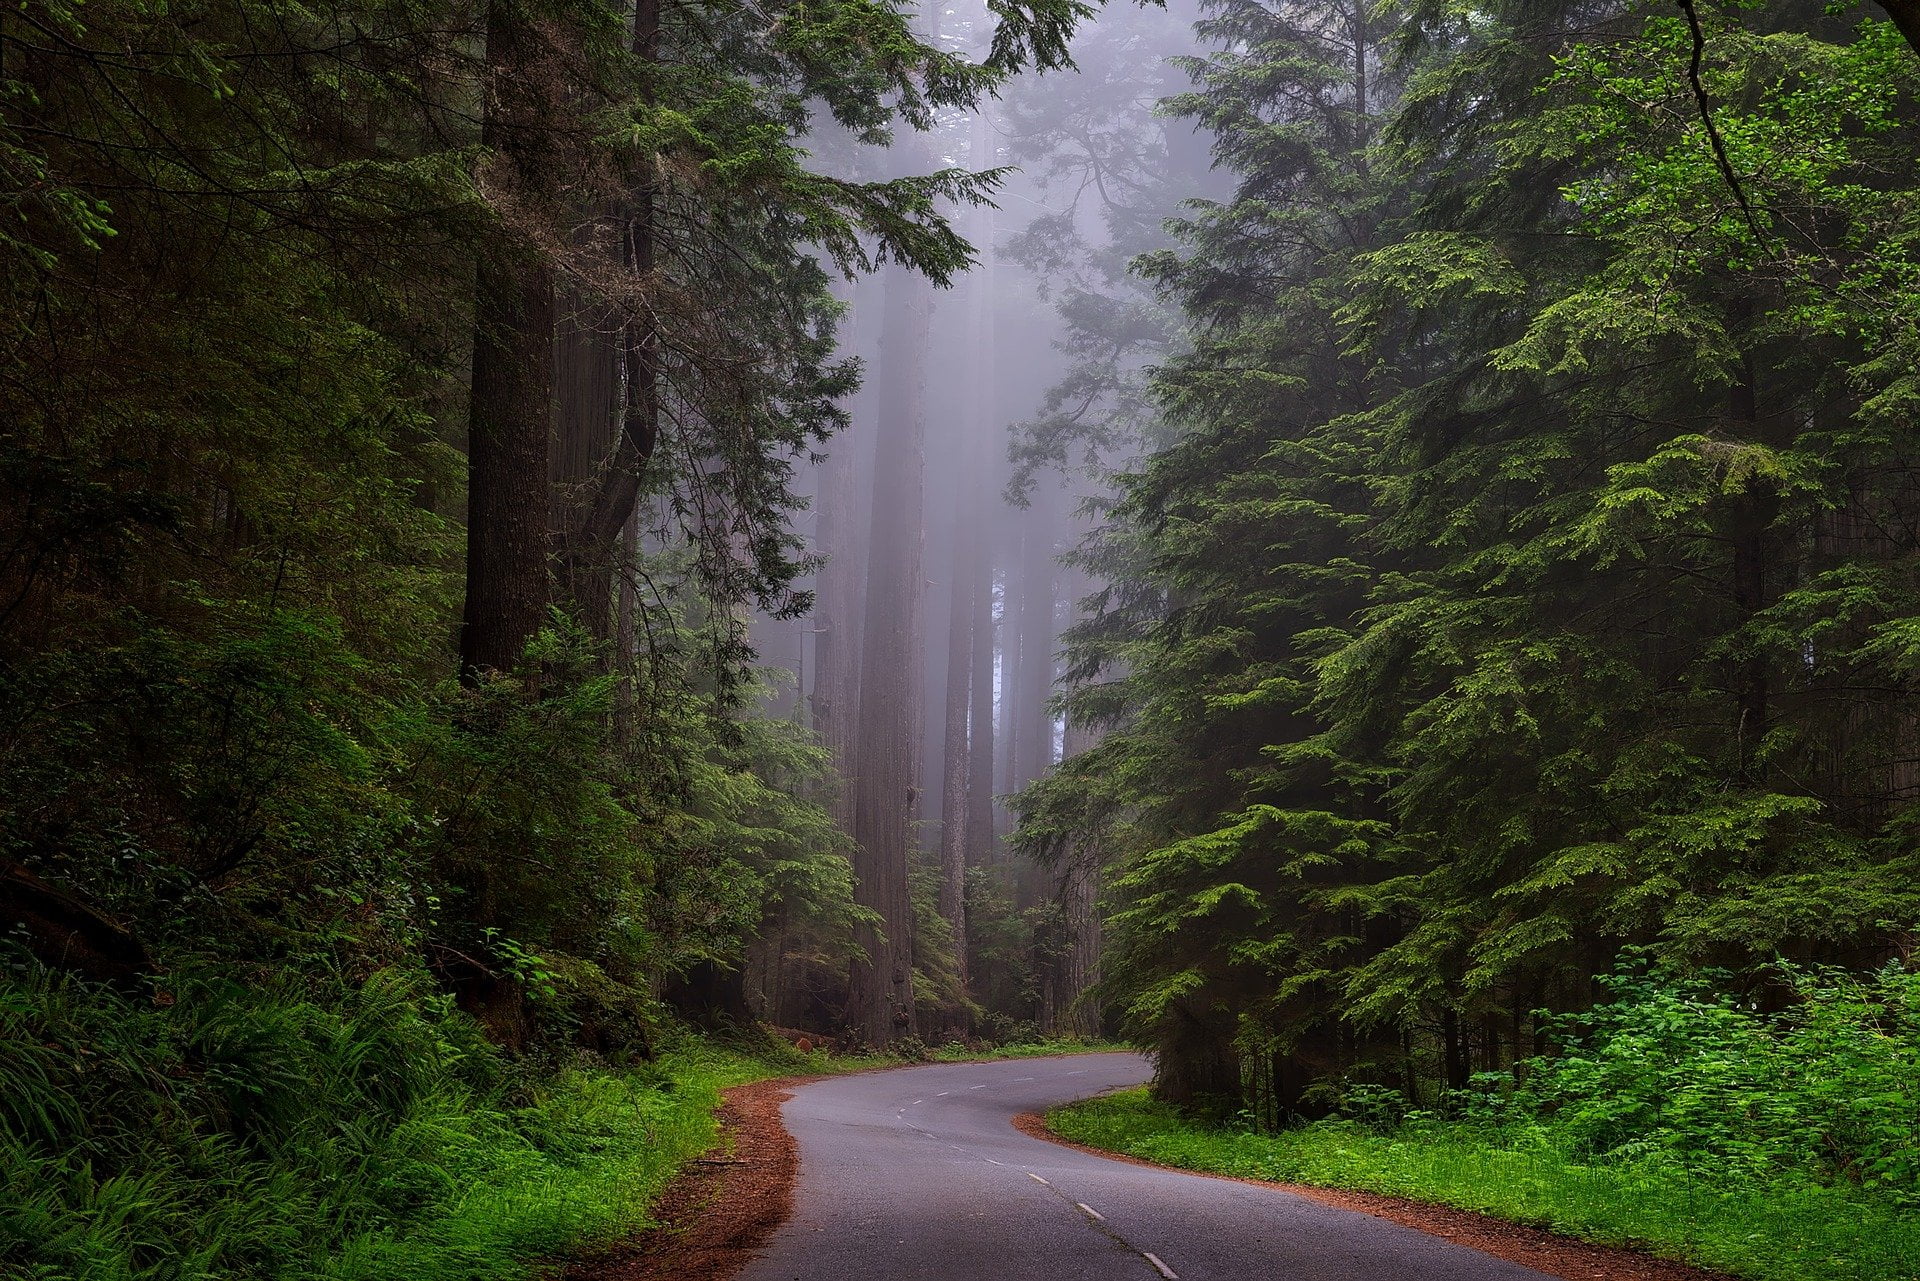 Is It Worth Going To Redwood National Park?